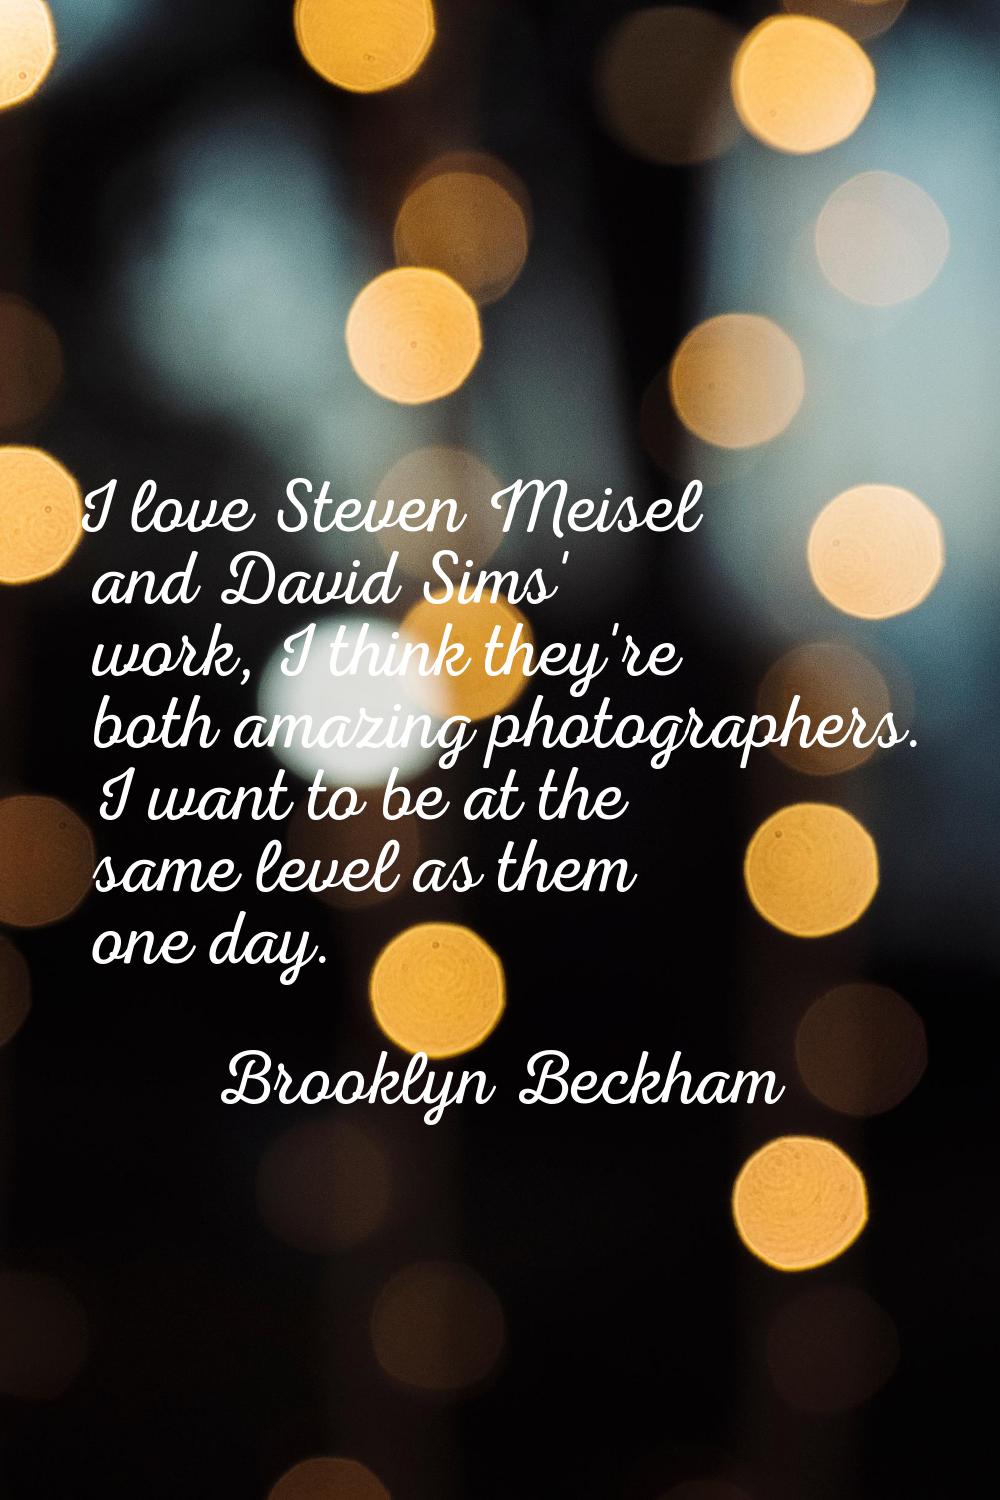 I love Steven Meisel and David Sims' work, I think they're both amazing photographers. I want to be